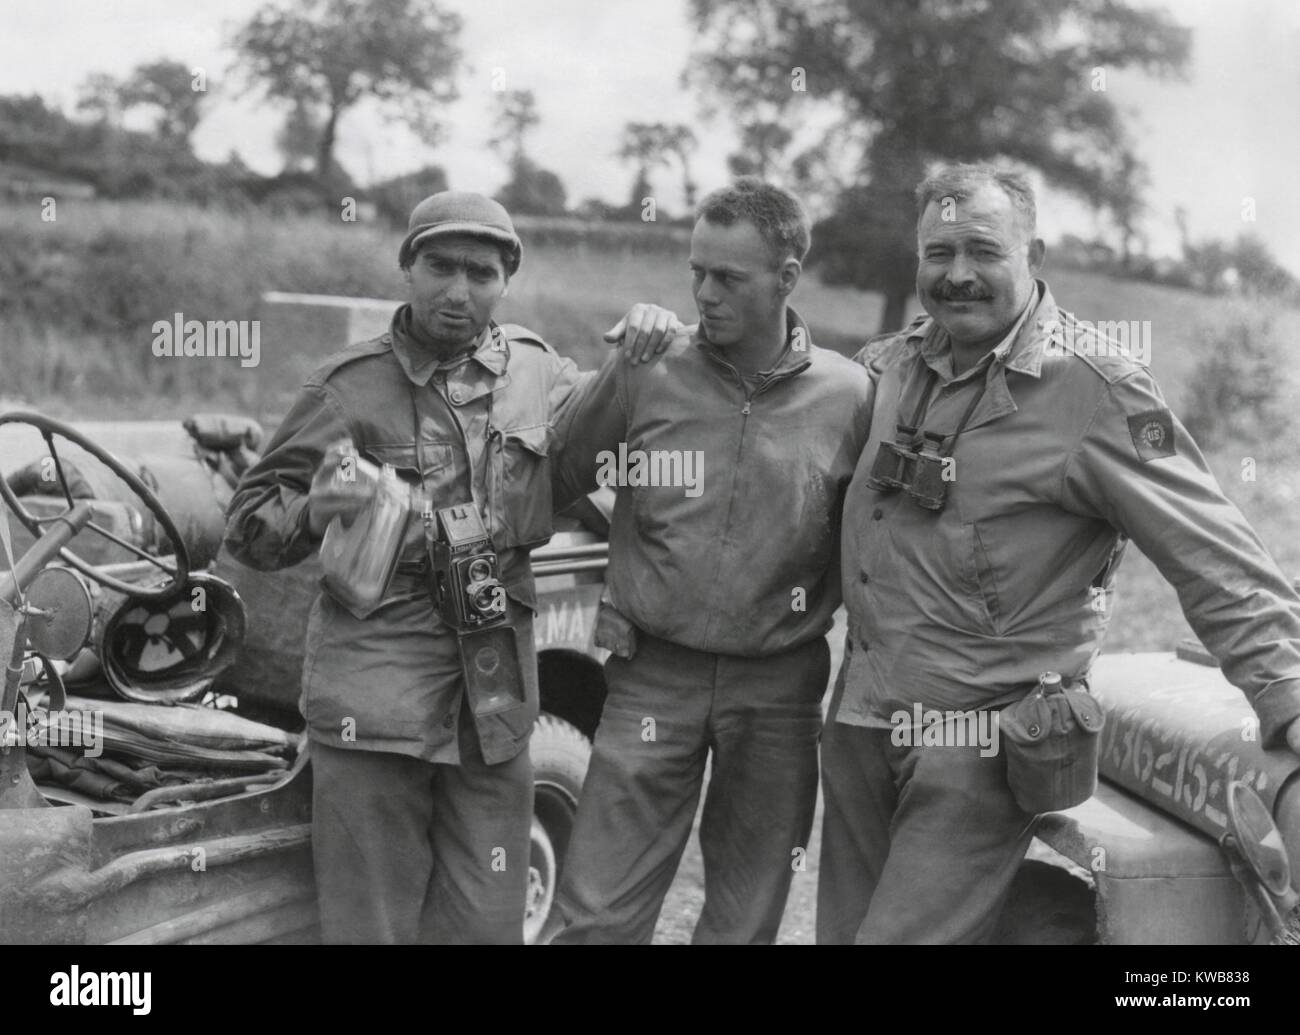 Robert Capa (left) and Ernest Hemingway (right) with their driver U.S. Army driver. They are waiting to follow an American Armored unit into action near Mont Bocard, France. July 30, 1944. (BSLOC 2014 8 215) Stock Photo